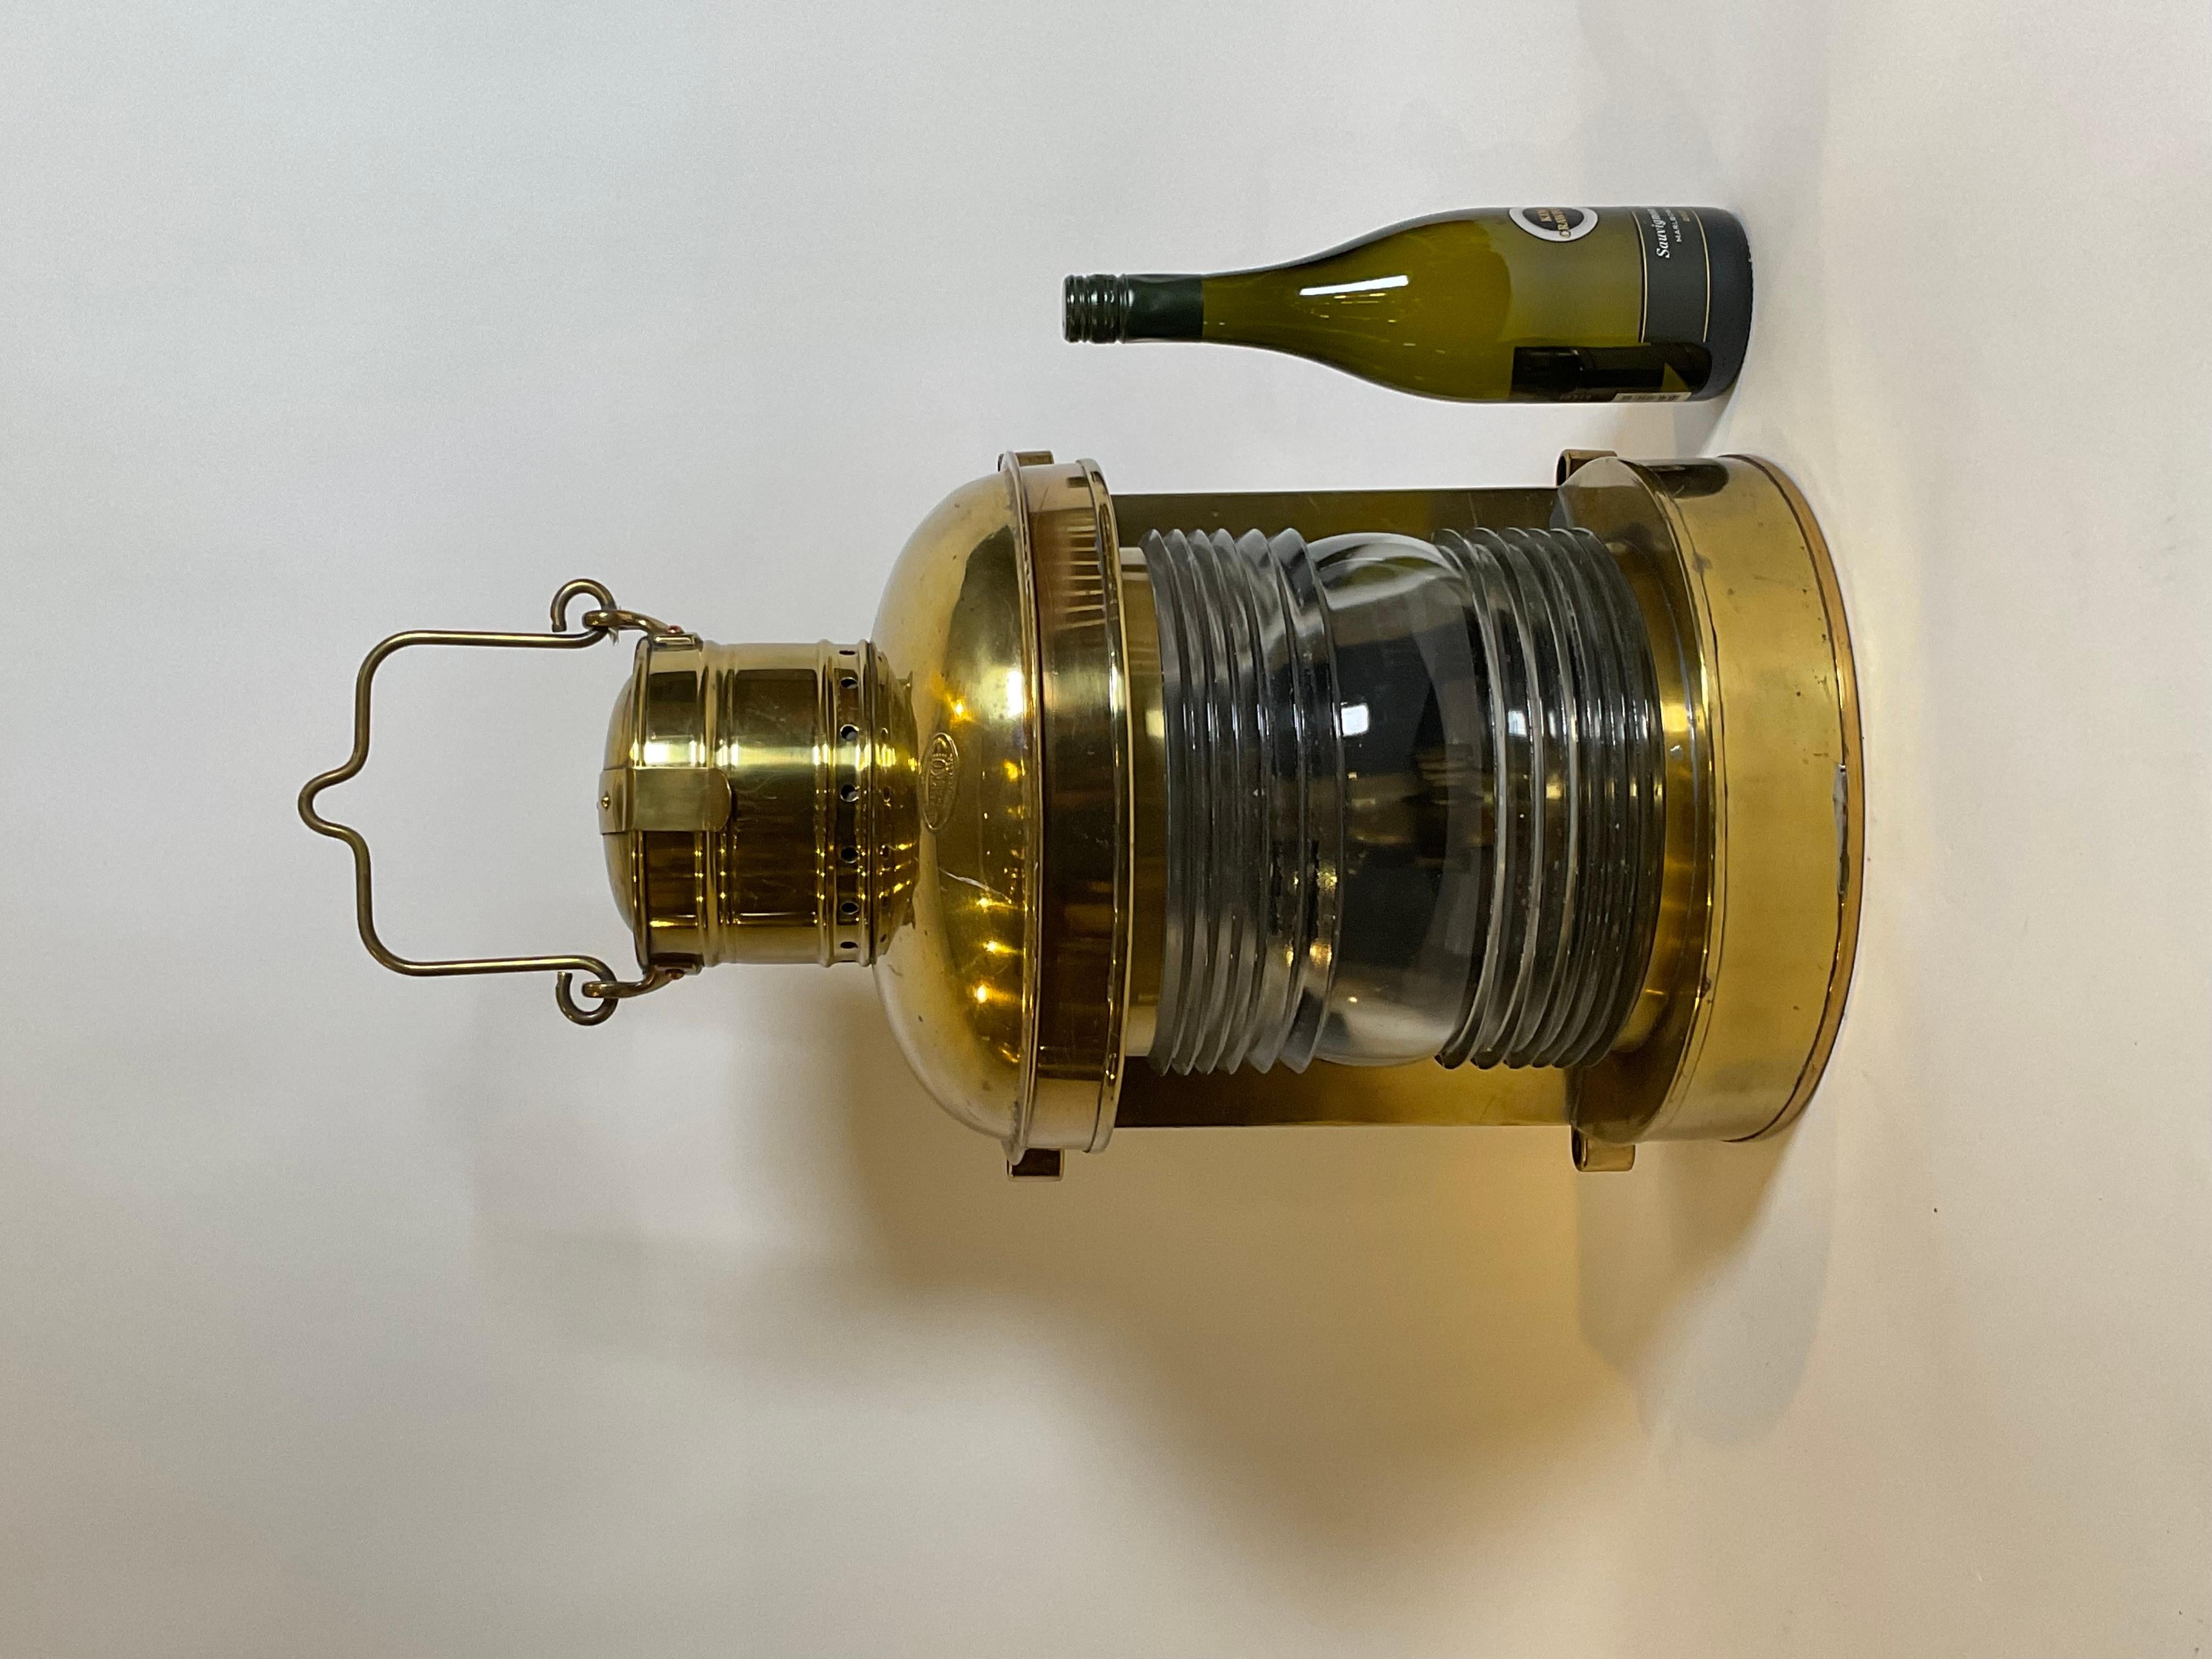 Solid brass ships masthead lantern. American made by Perkins Marine Lamp Corporation of Brooklyn, New York. Fitted with a glass fresnel lens. Old lacquered finish. With original burner and tank.

Weight: 22 lbs.
Overall Dimensions: 20